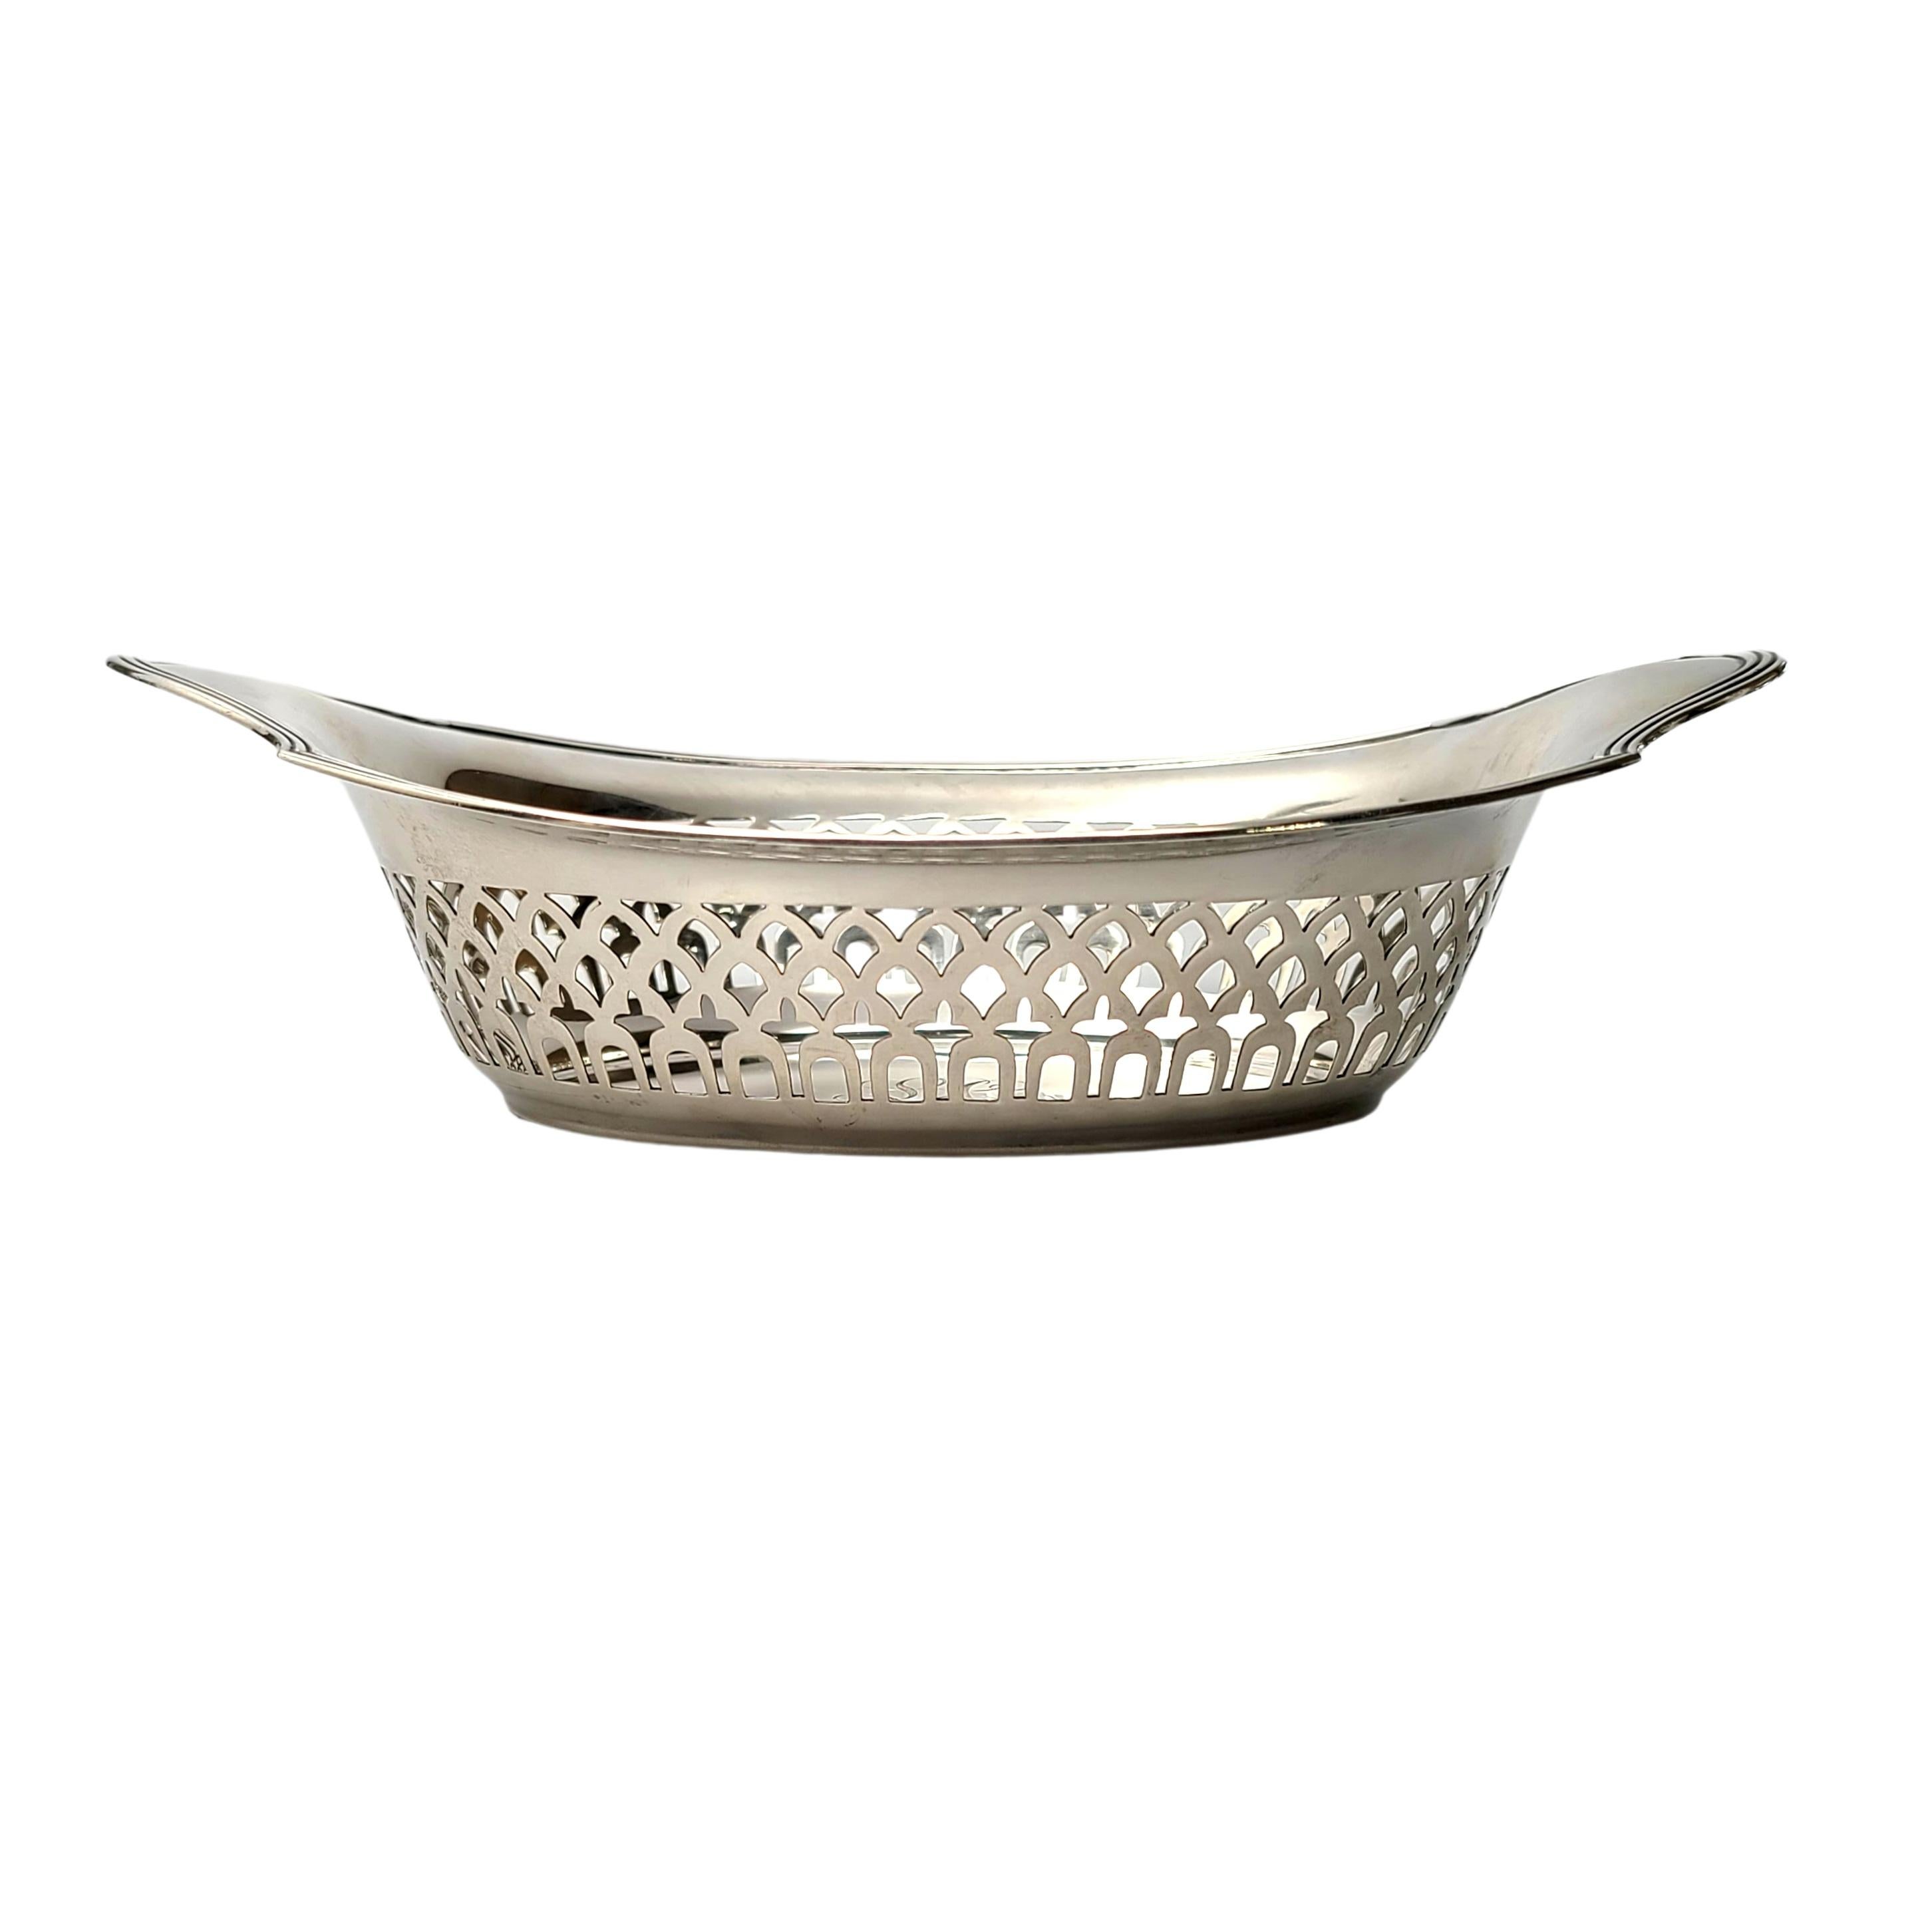 Sterling silver oval dish by Gorham in the Plymouth pattern with monogram, circa 1912.

Monogram appears to be LC

Gorham's Plymouth pattern is a simple and timeless design. This piece features open work on the sides, and a monogram on the inside of